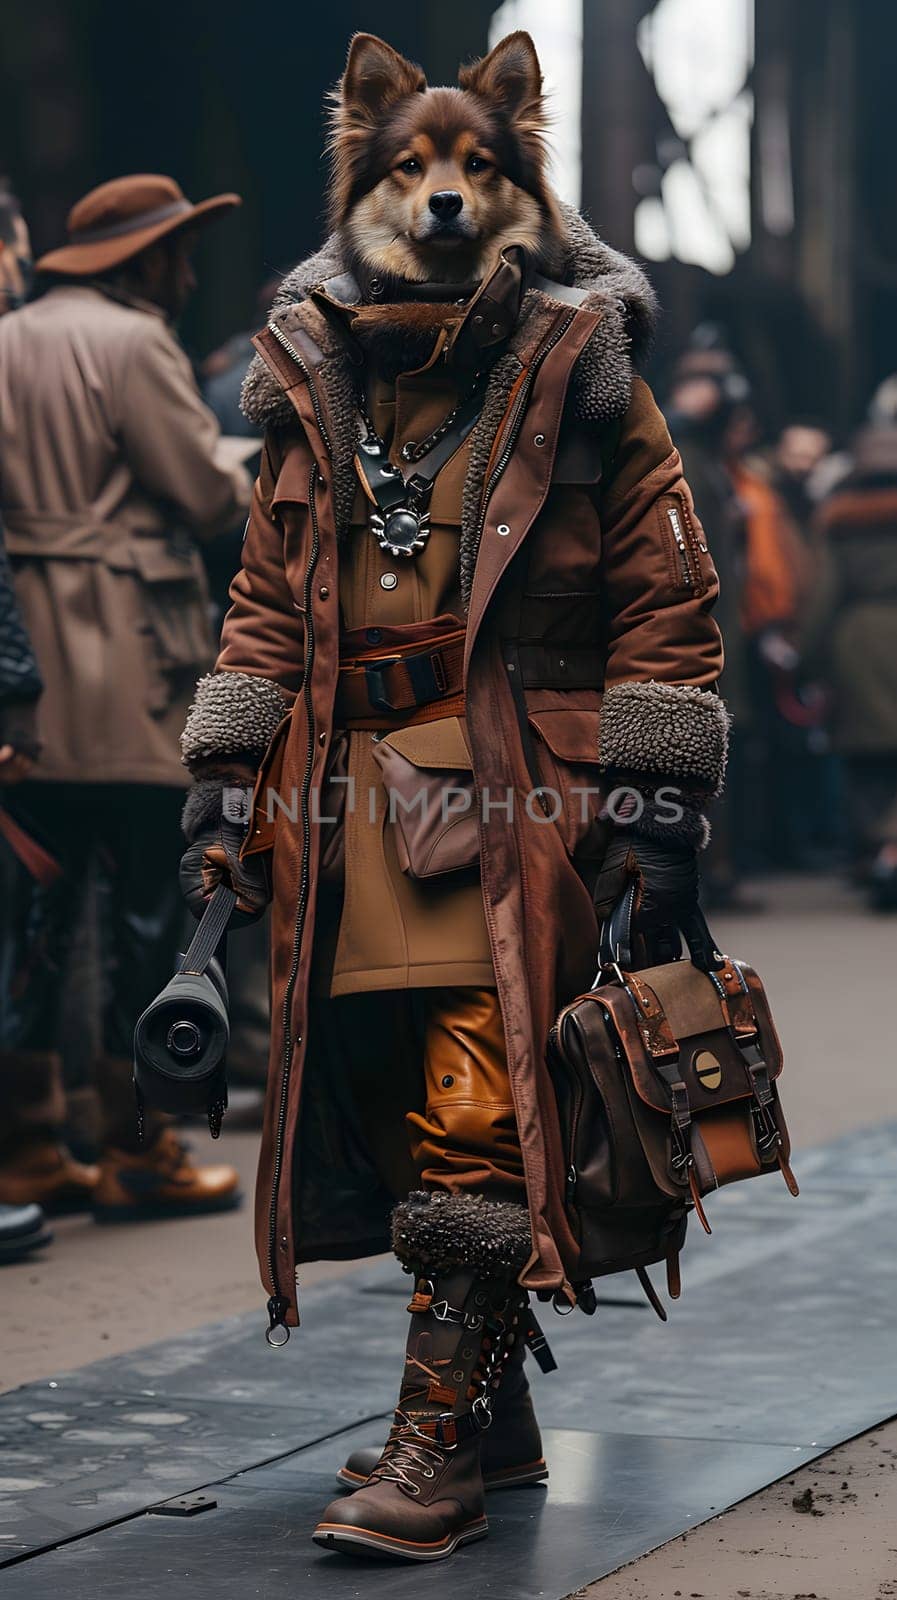 A military person dressed as a fictional dog character is holding a camera and a bag at a monument event. The uniform includes a hat, fur, and metal accents